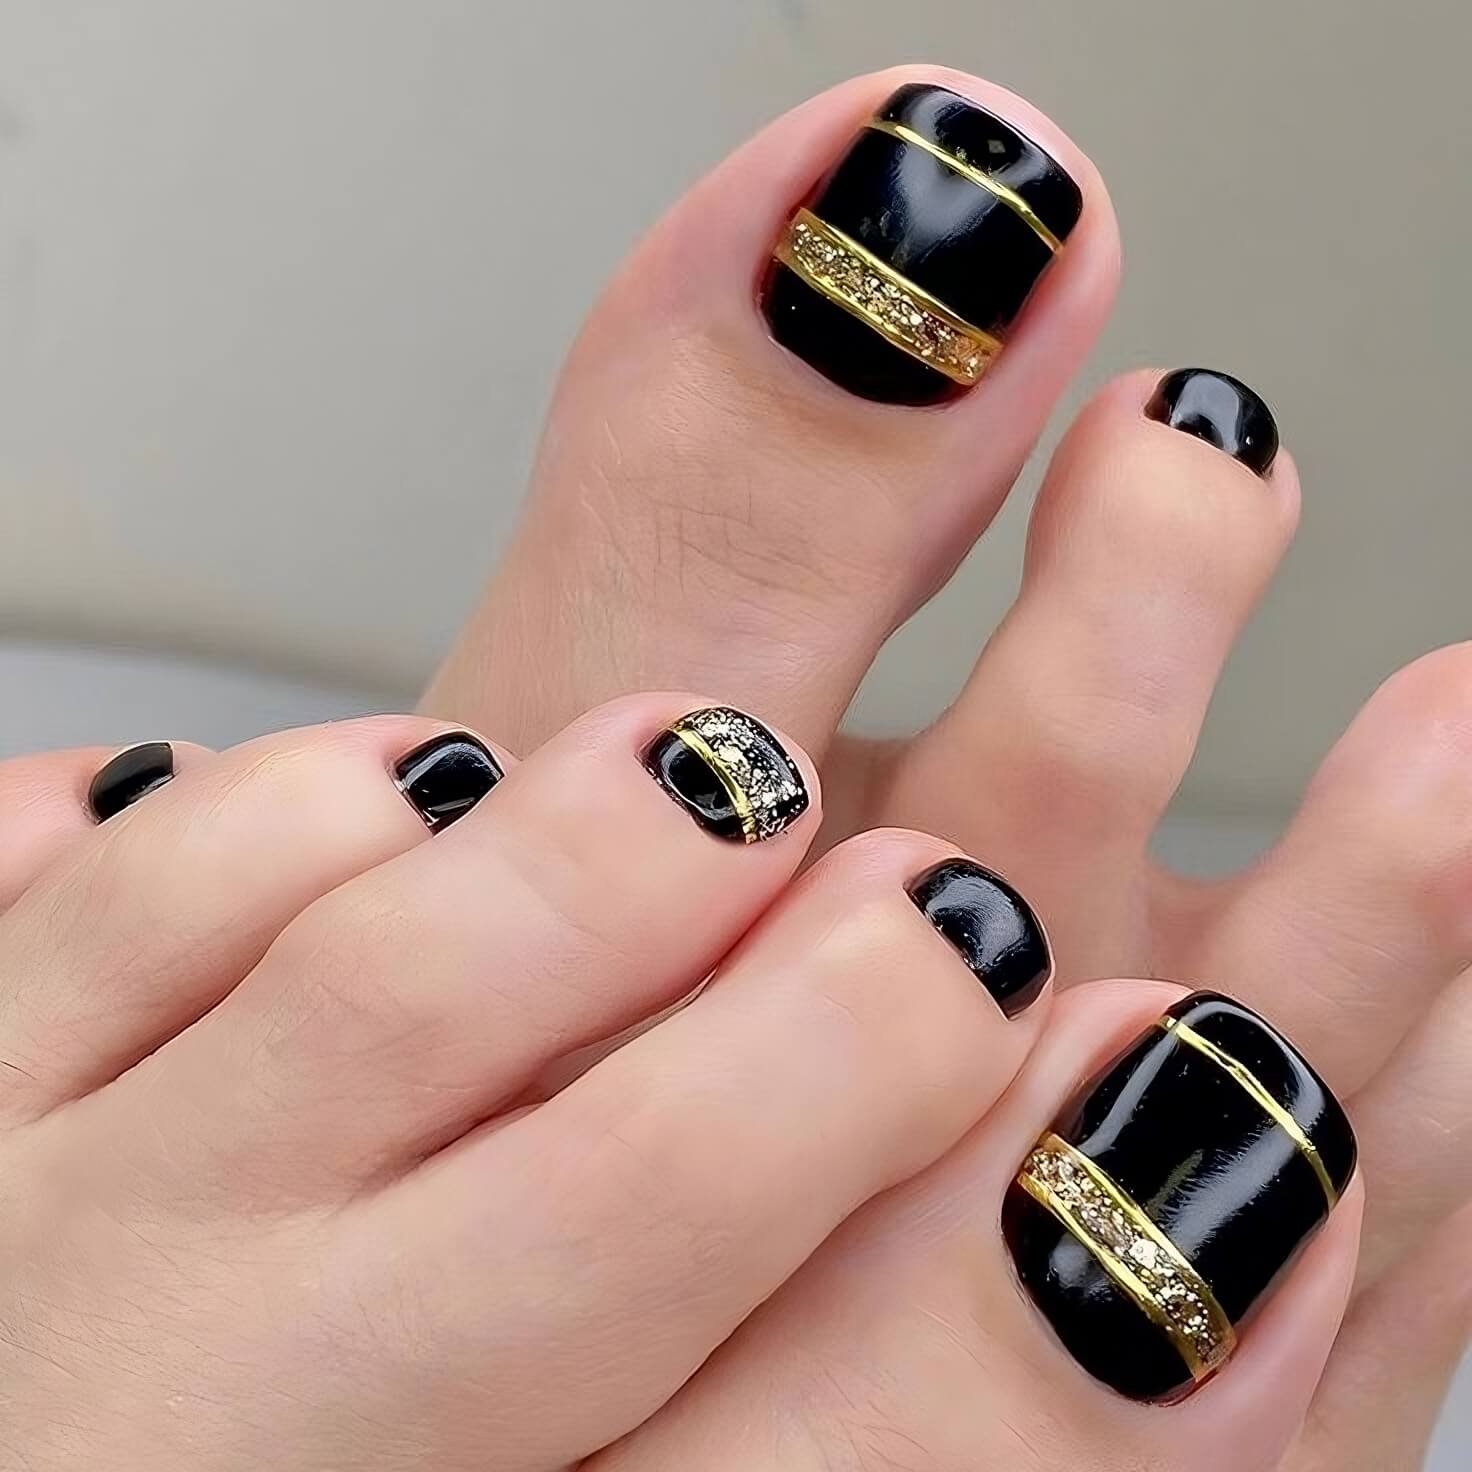 40 adorable toe nail designs to brighten your day. – The Daily Worlds